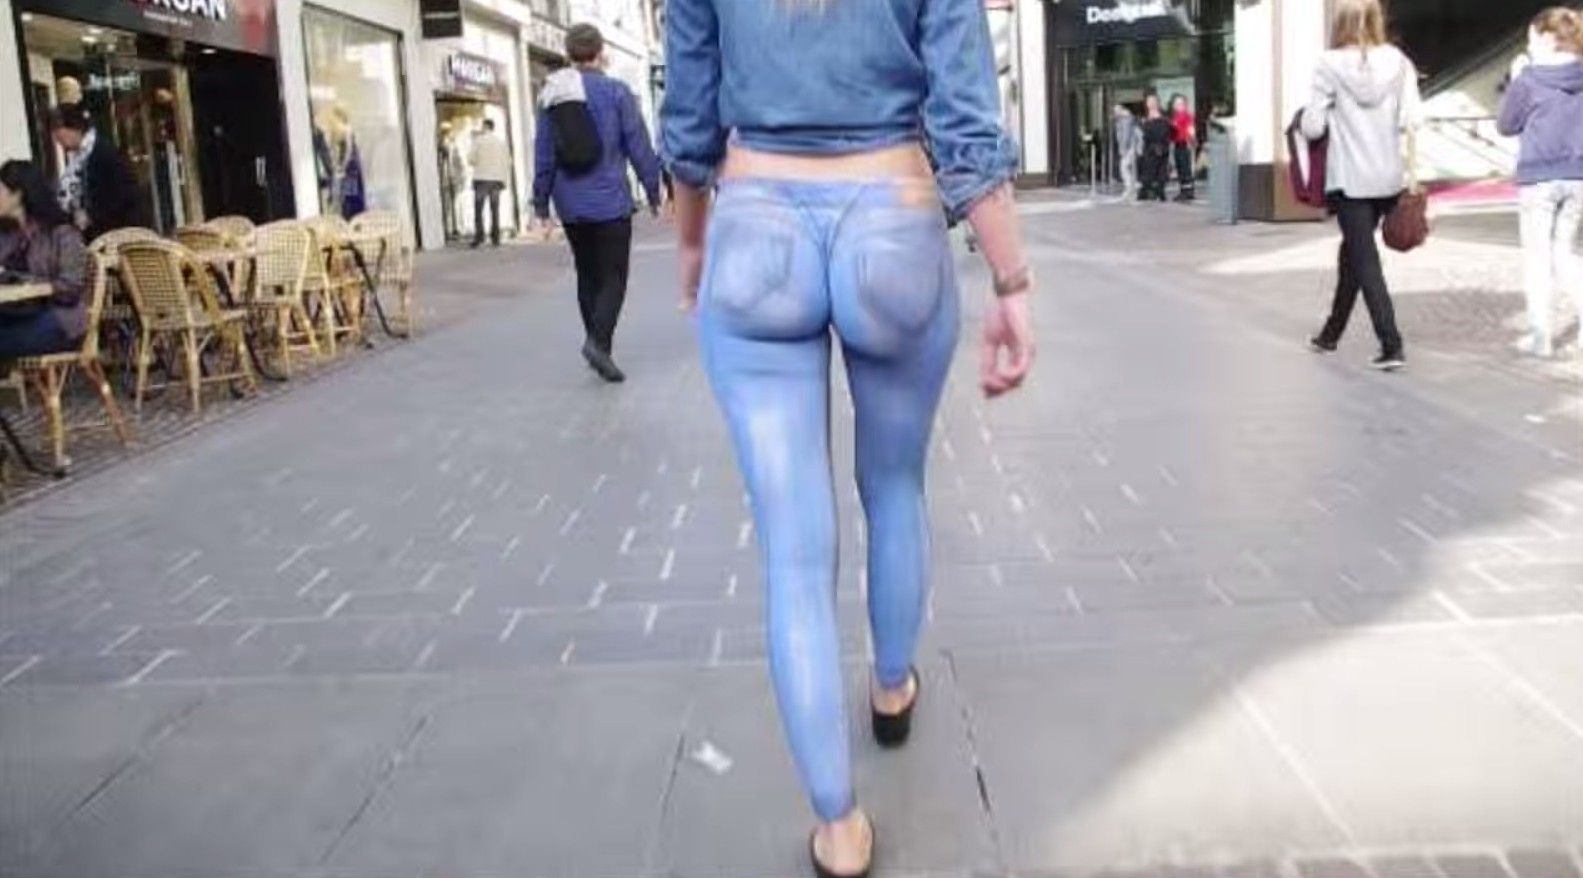 Mr. M. recommendet Skimpy Halloween Costume - Wife Walks Down Busy Street In Costume & Thong.